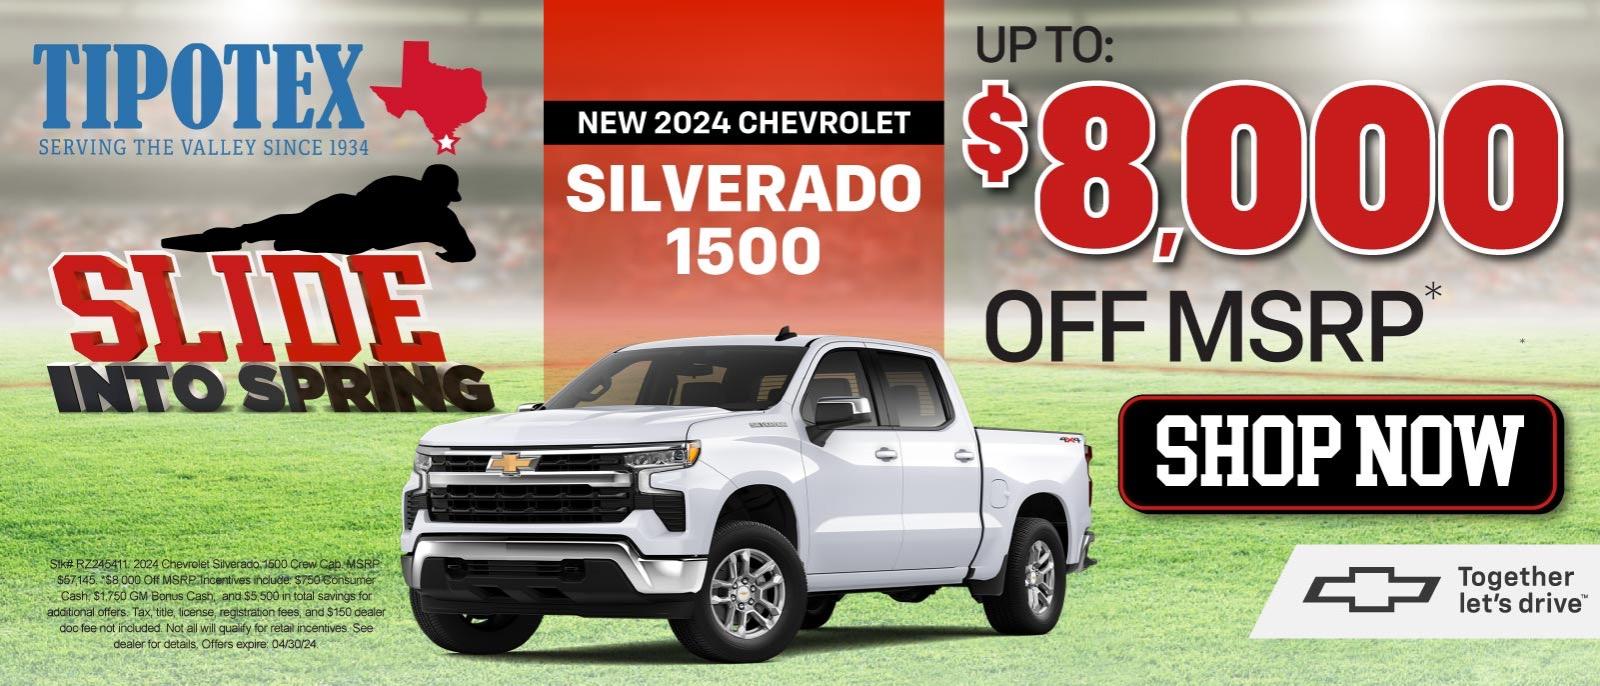 New 2024 Chevrolet Silverado 1500 - Up To: $8,000 Off MSRP* — Shop Now